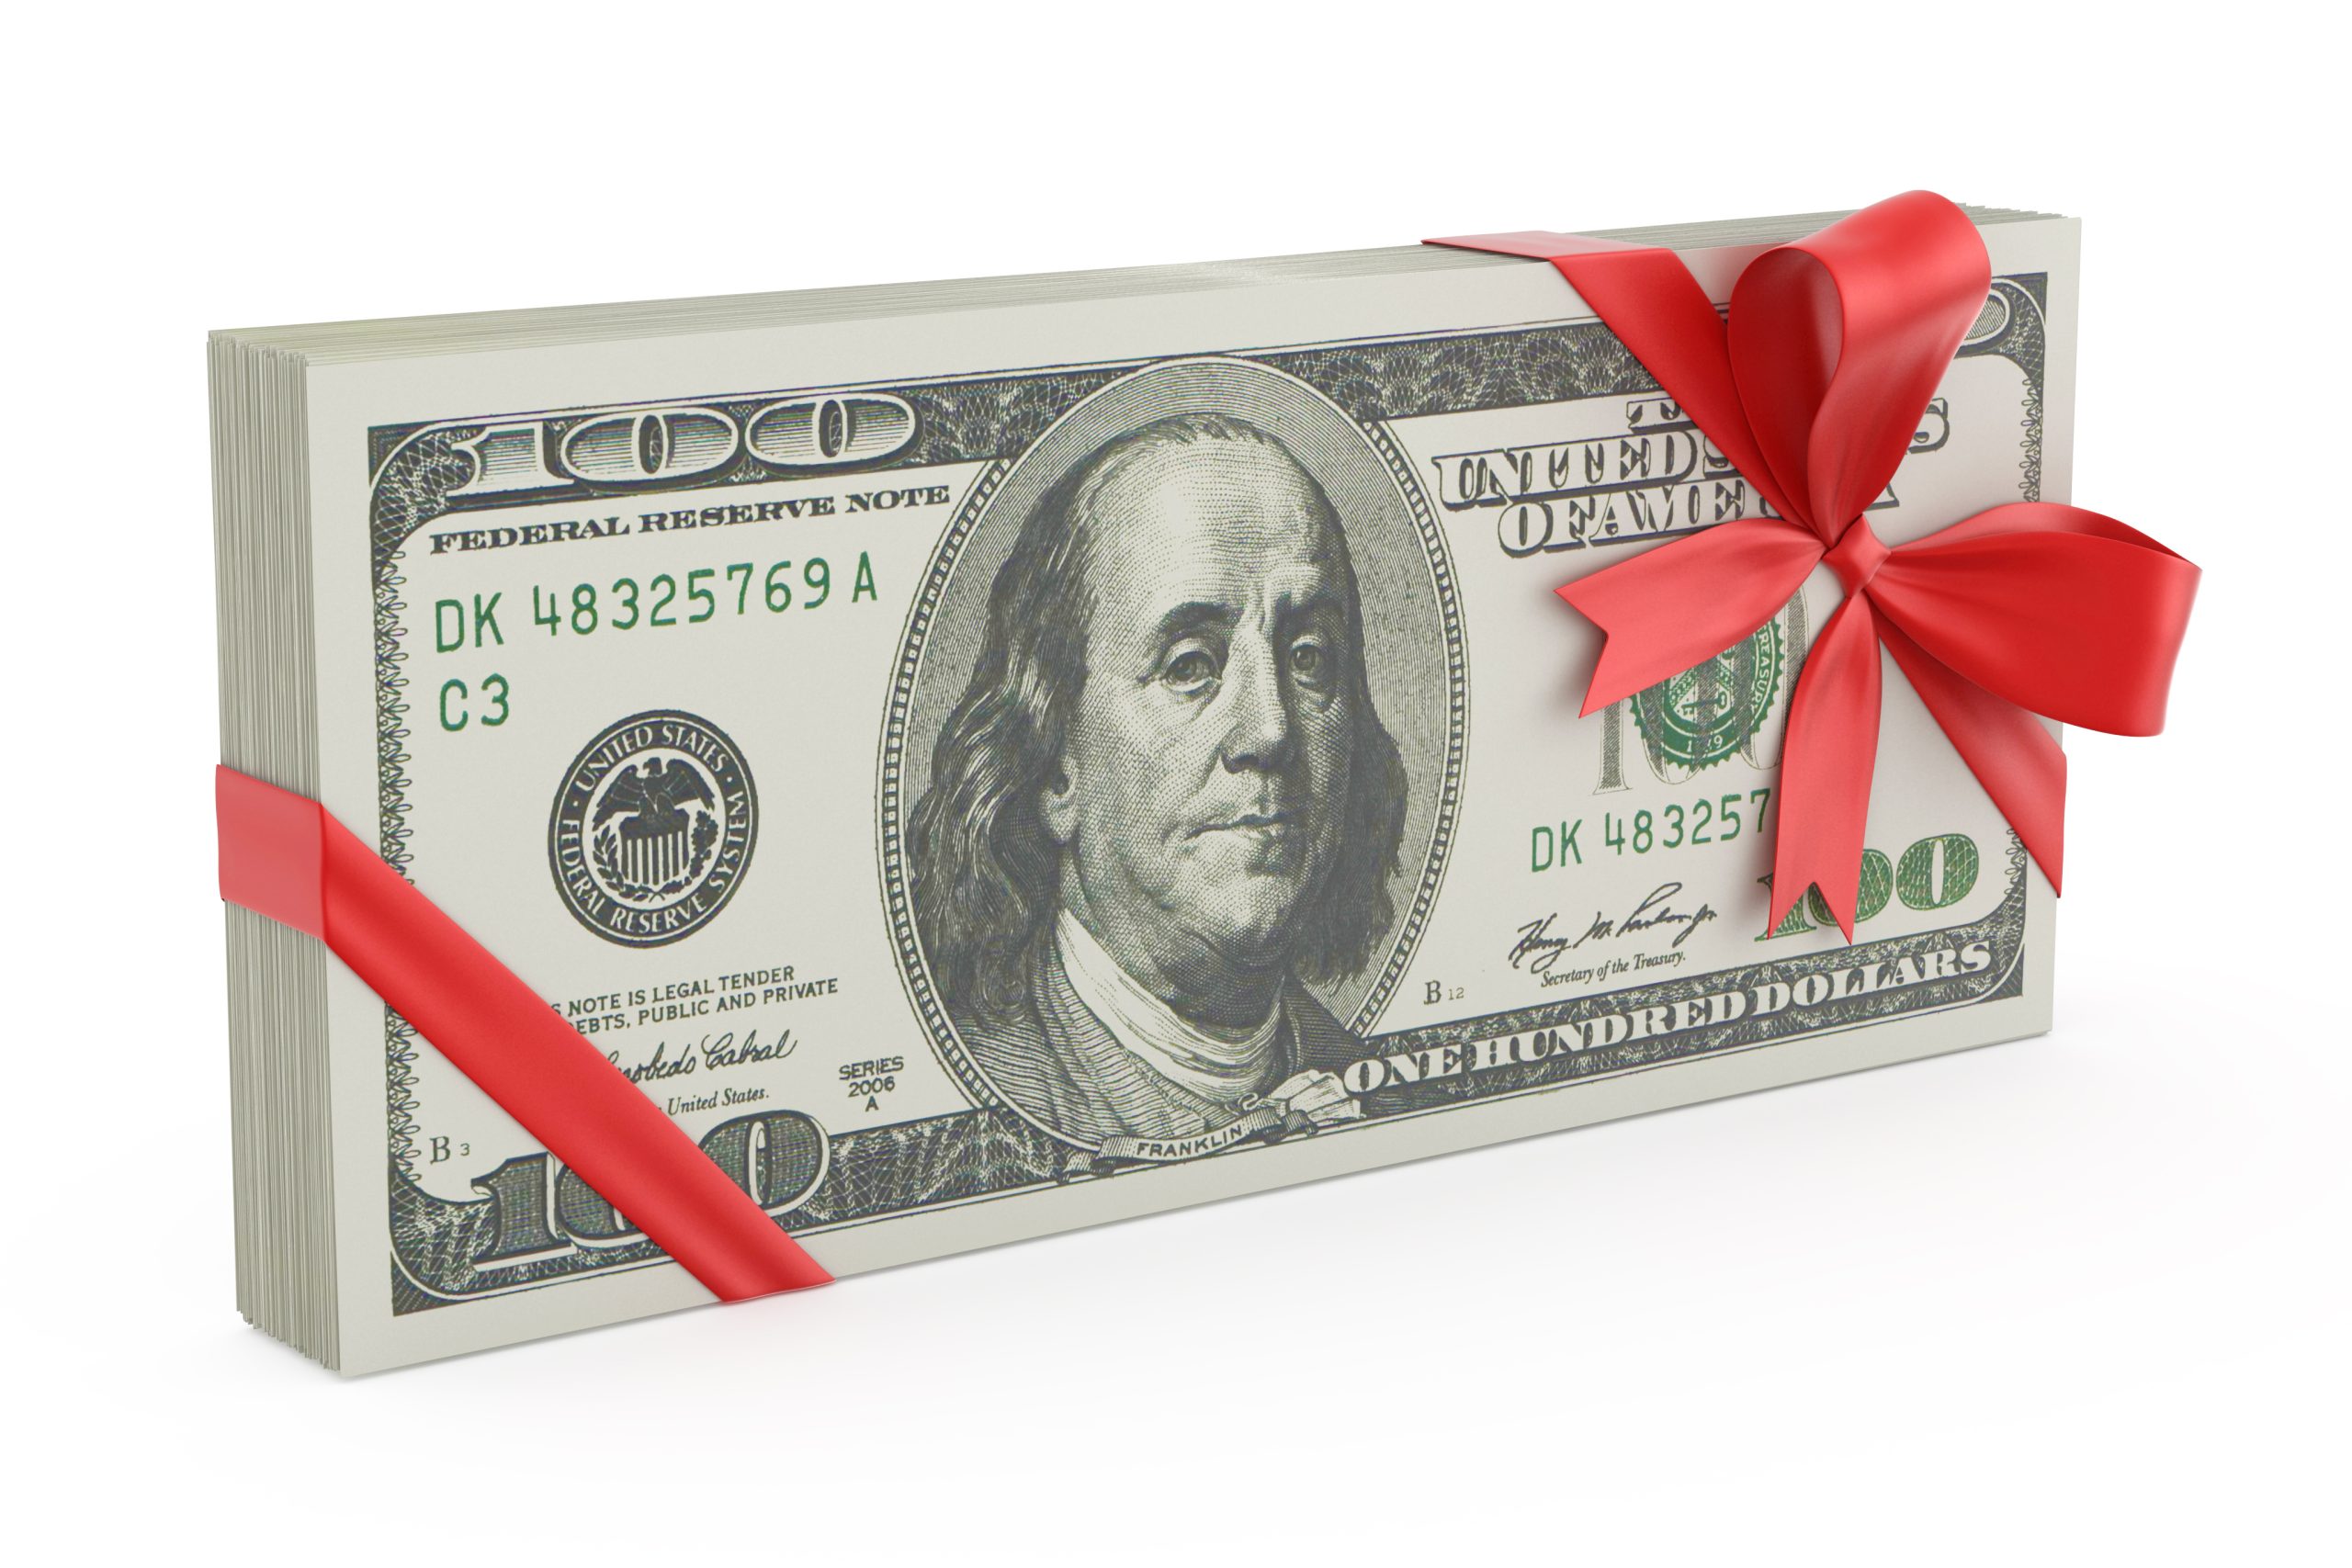 How to Take Advantage of the Gift Tax Exclusion